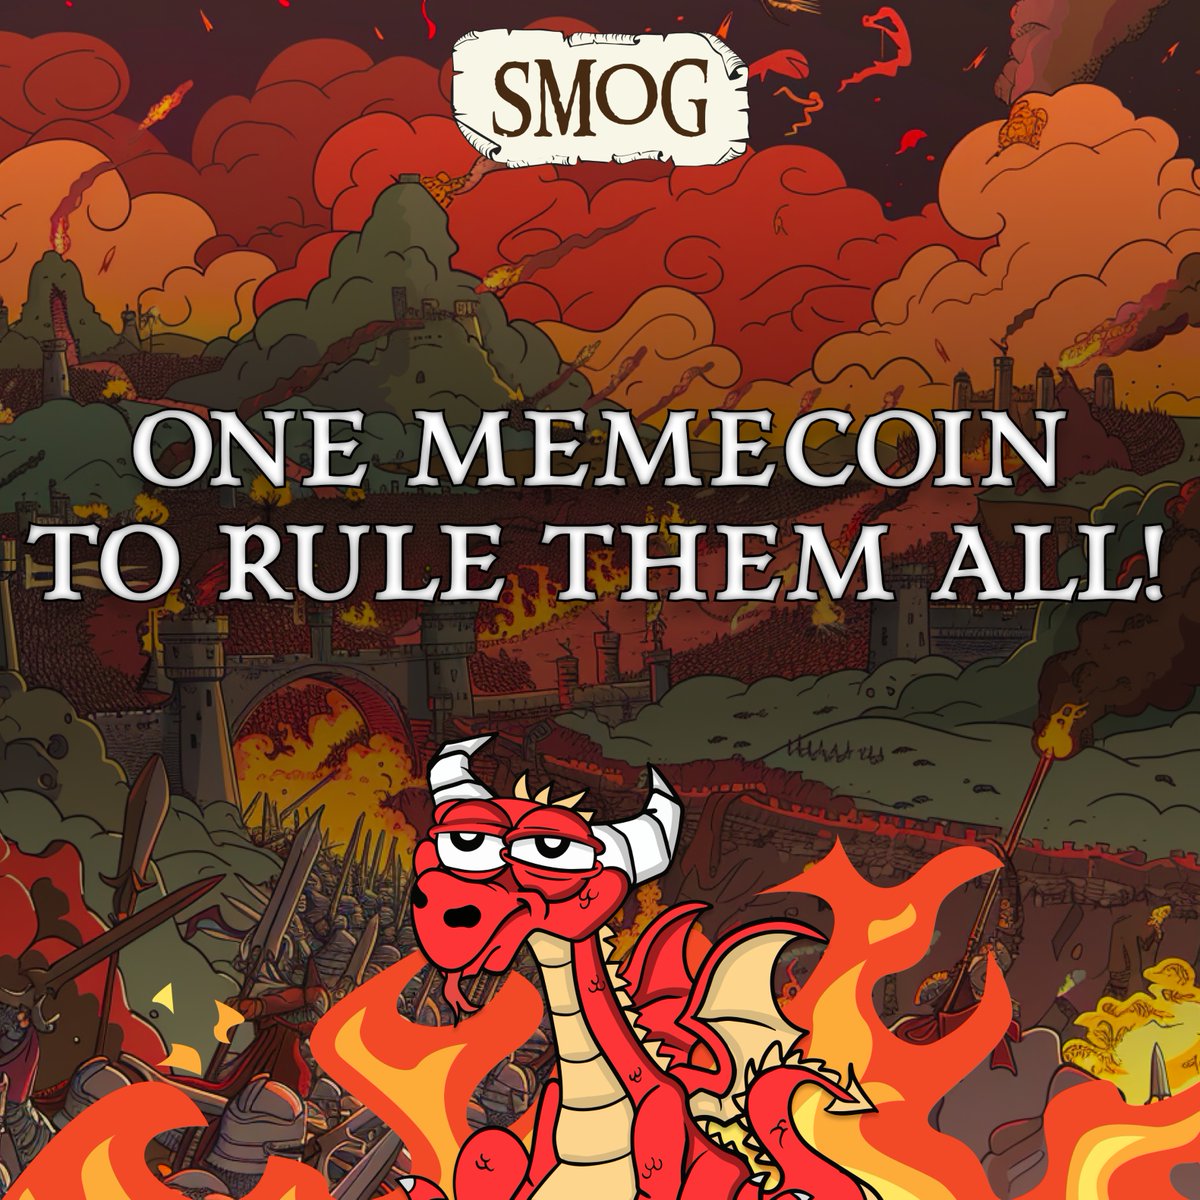 $SMOG 🐉 | The greatest #Solana #Airdrop of all time! 🔥 Trade and complete quests on #Zealy to qualify in the airdrop and climb the leaderboard! 🥇 🌐 150K+ Cross platform Community 👥 126K+ Holders 💰 $46.12M+ MC ✅ 12.8M Quests Completed 🪂 bit.ly/SmogAirdrop 🔗